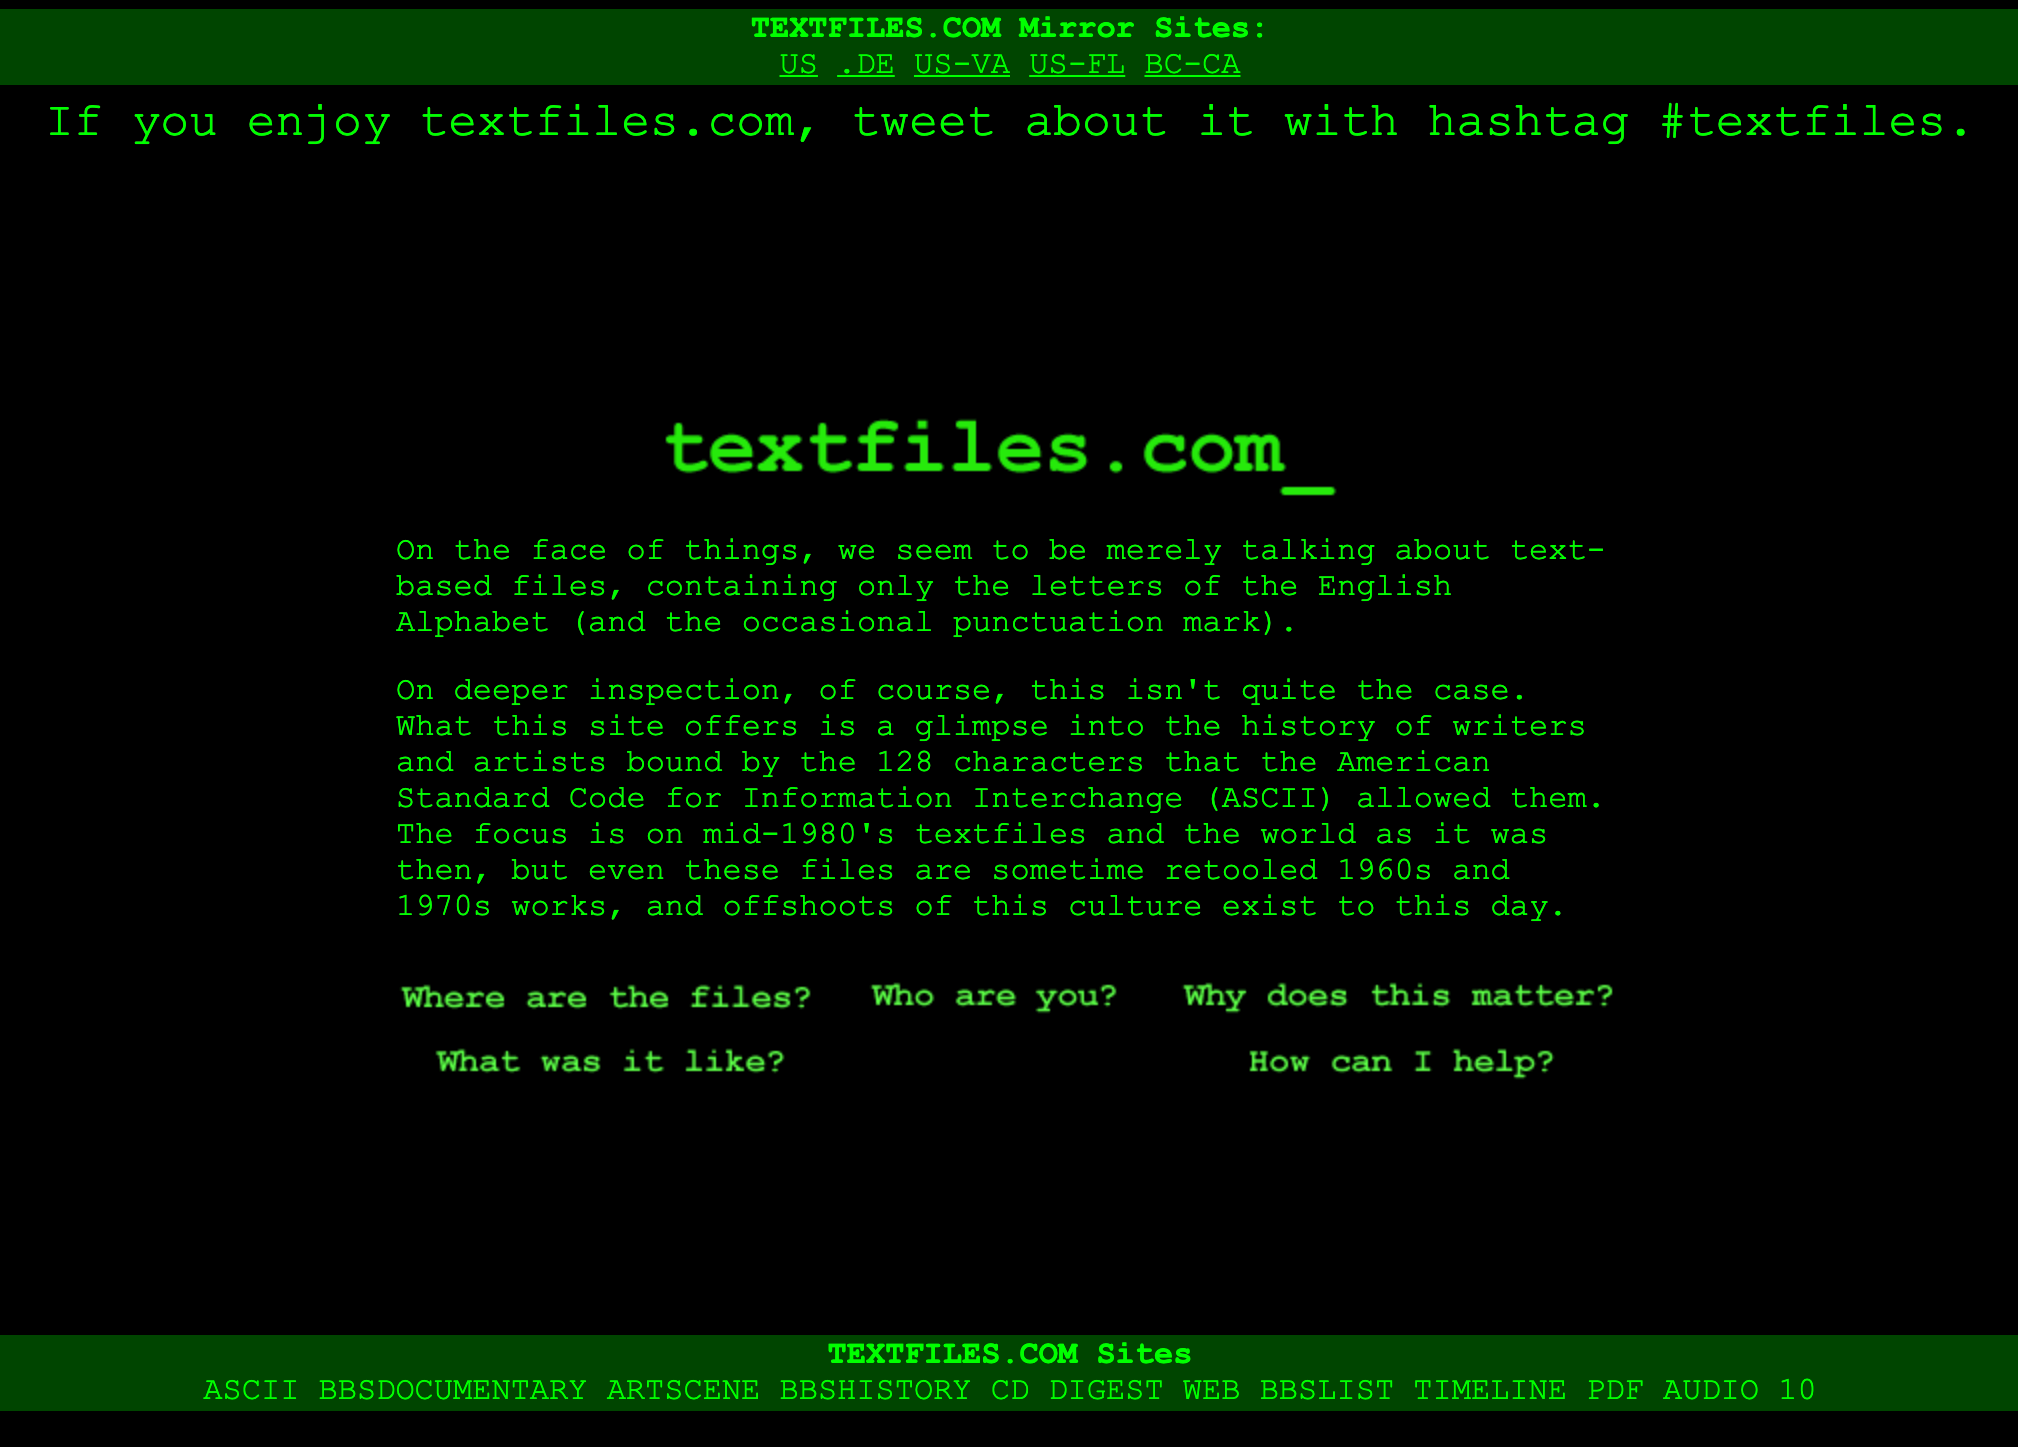 TextFiles.com gives us a unique view into the pre-Internet days where the BBS reigned supreme